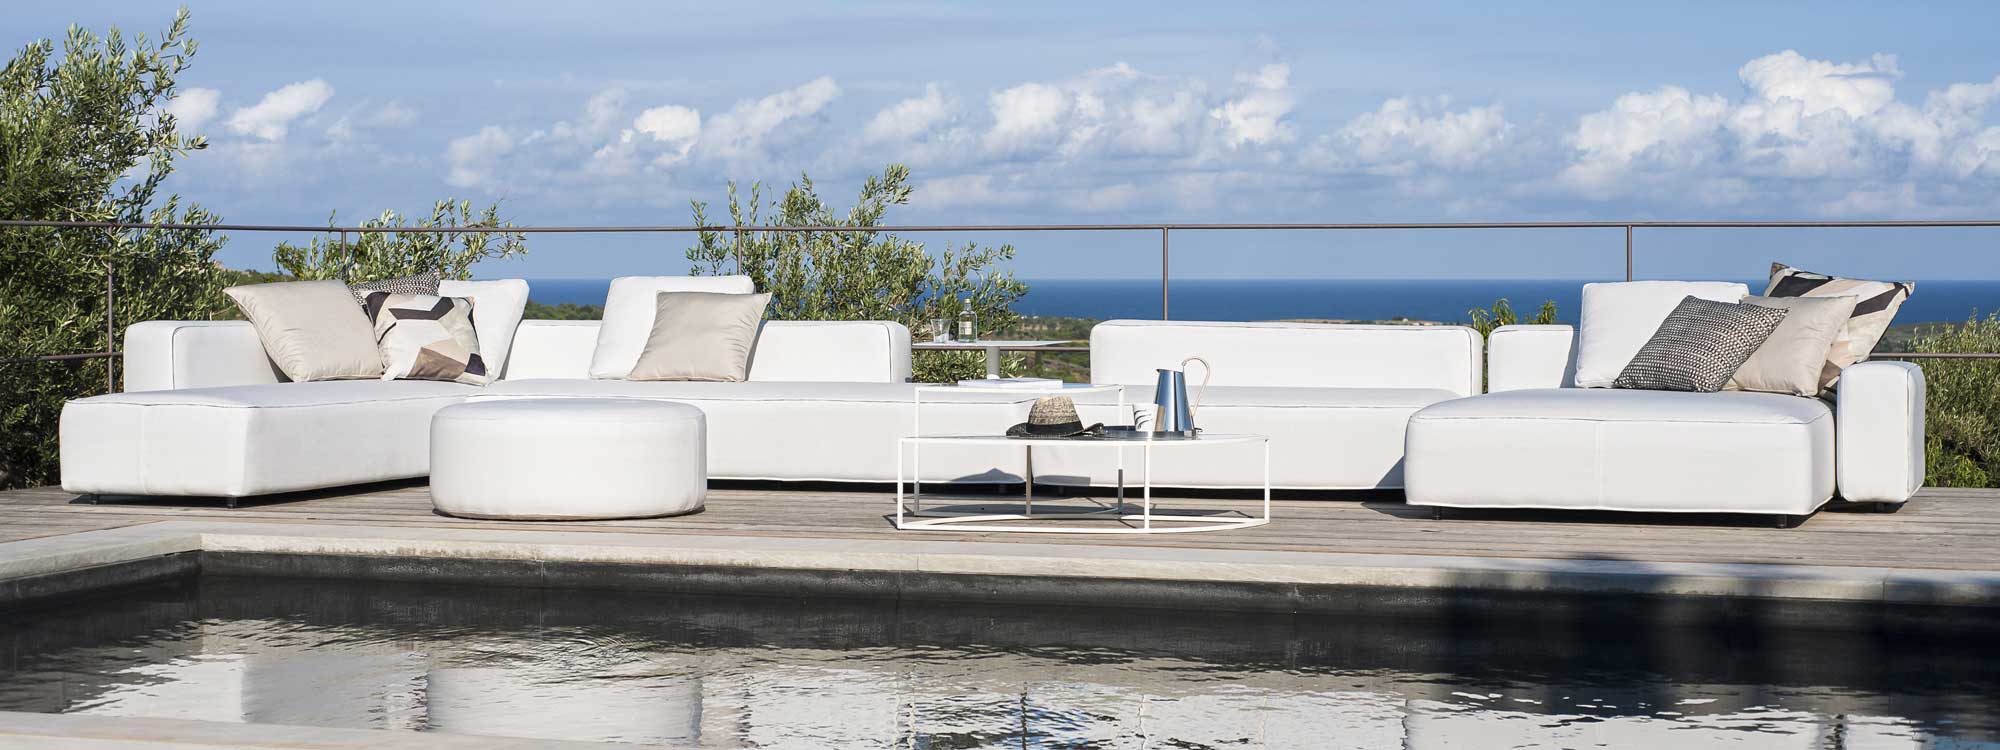 Image of large Dandy white upholstered modular garden sofa on poolside with sea in the background